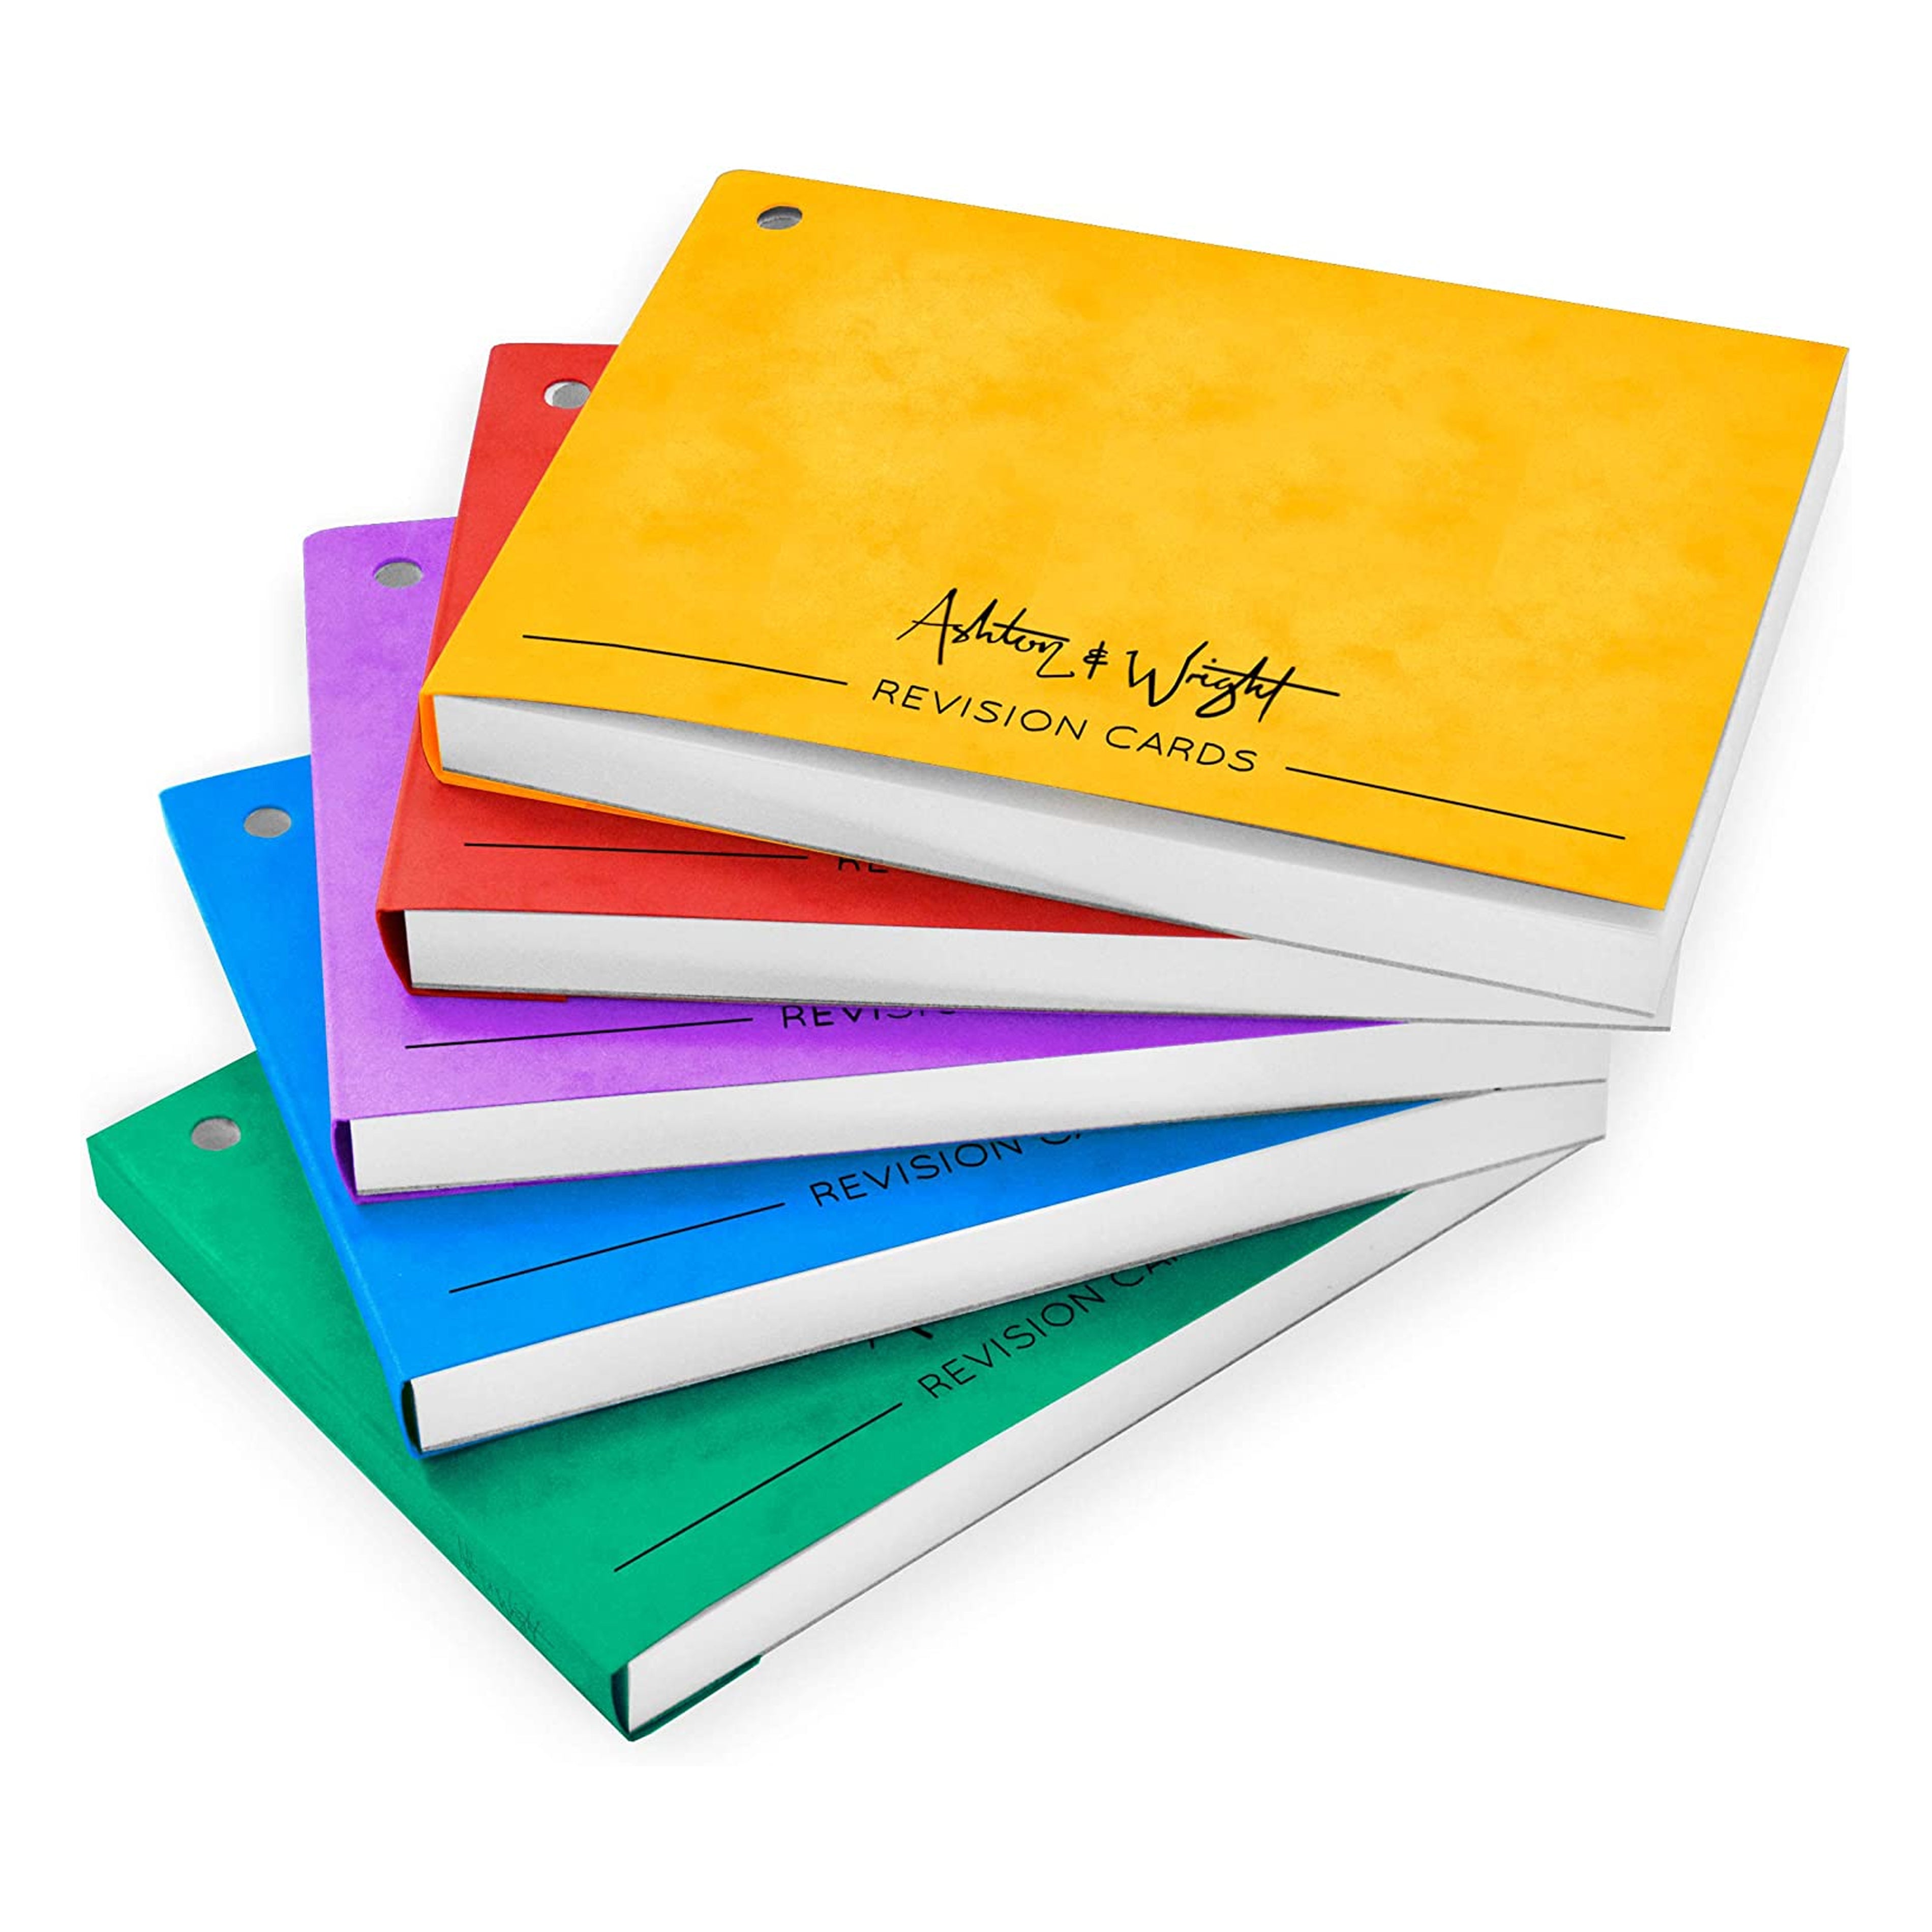 Revision Cards Books - 1 of Each Colour - Pack of 5